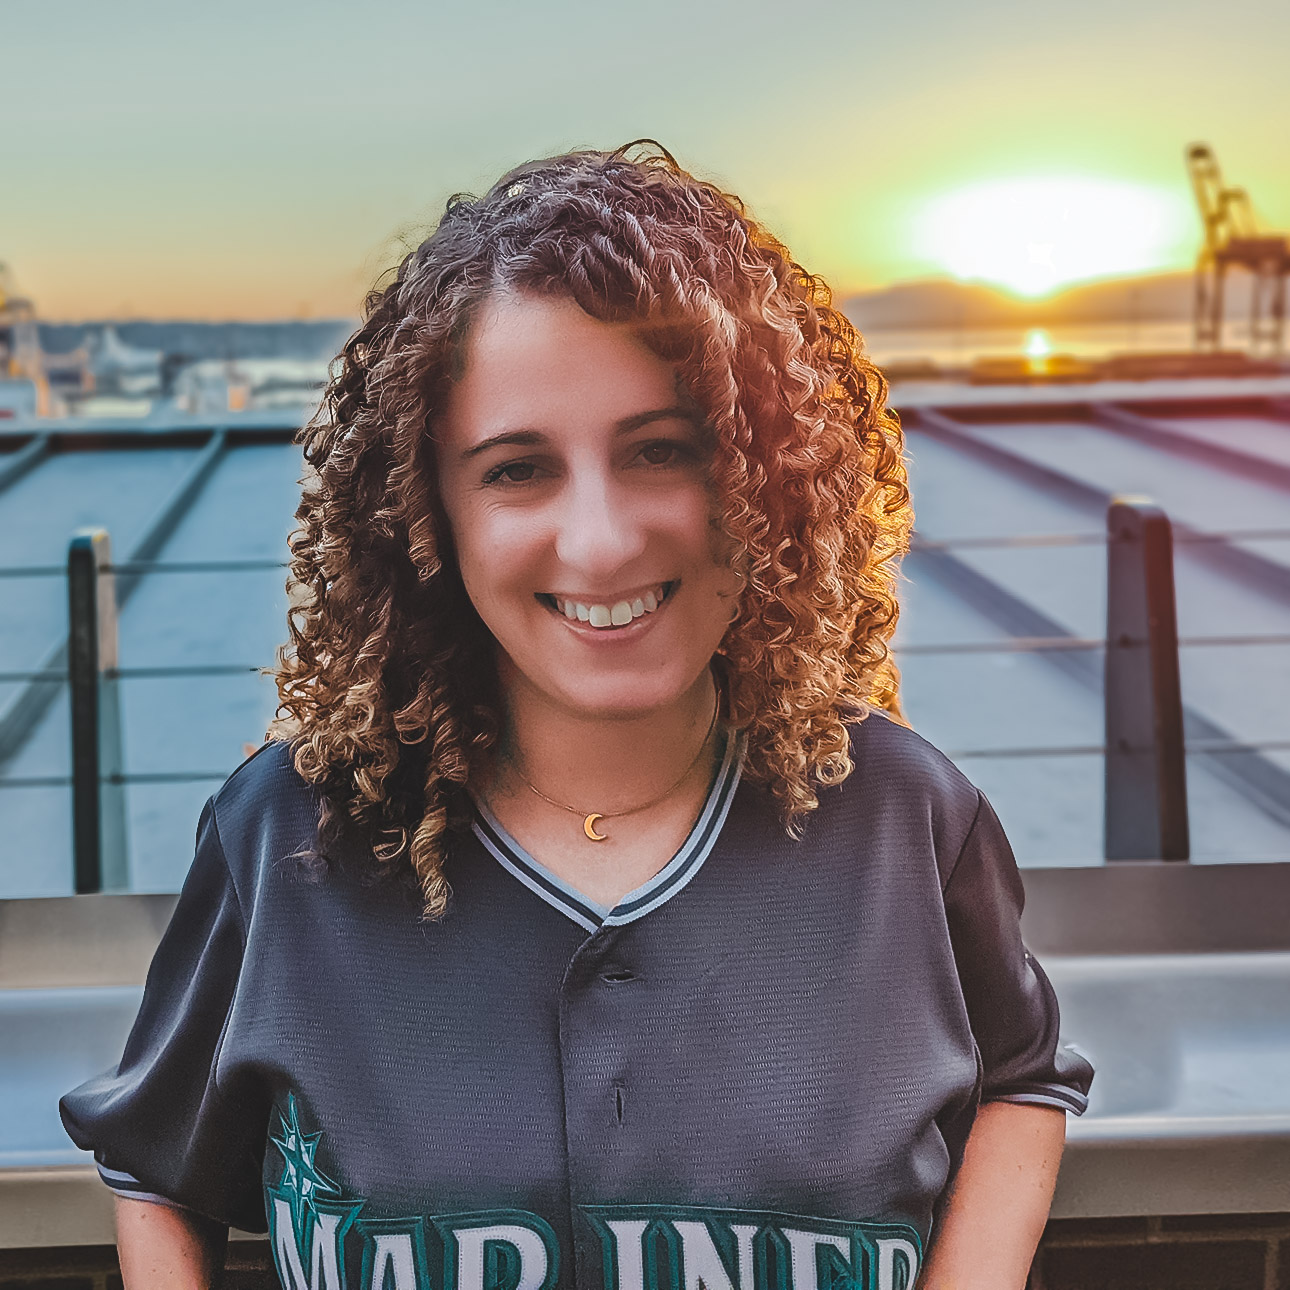 Smiling person with long, curly, brown hair wearing a Mariner jersey posing before a sunset